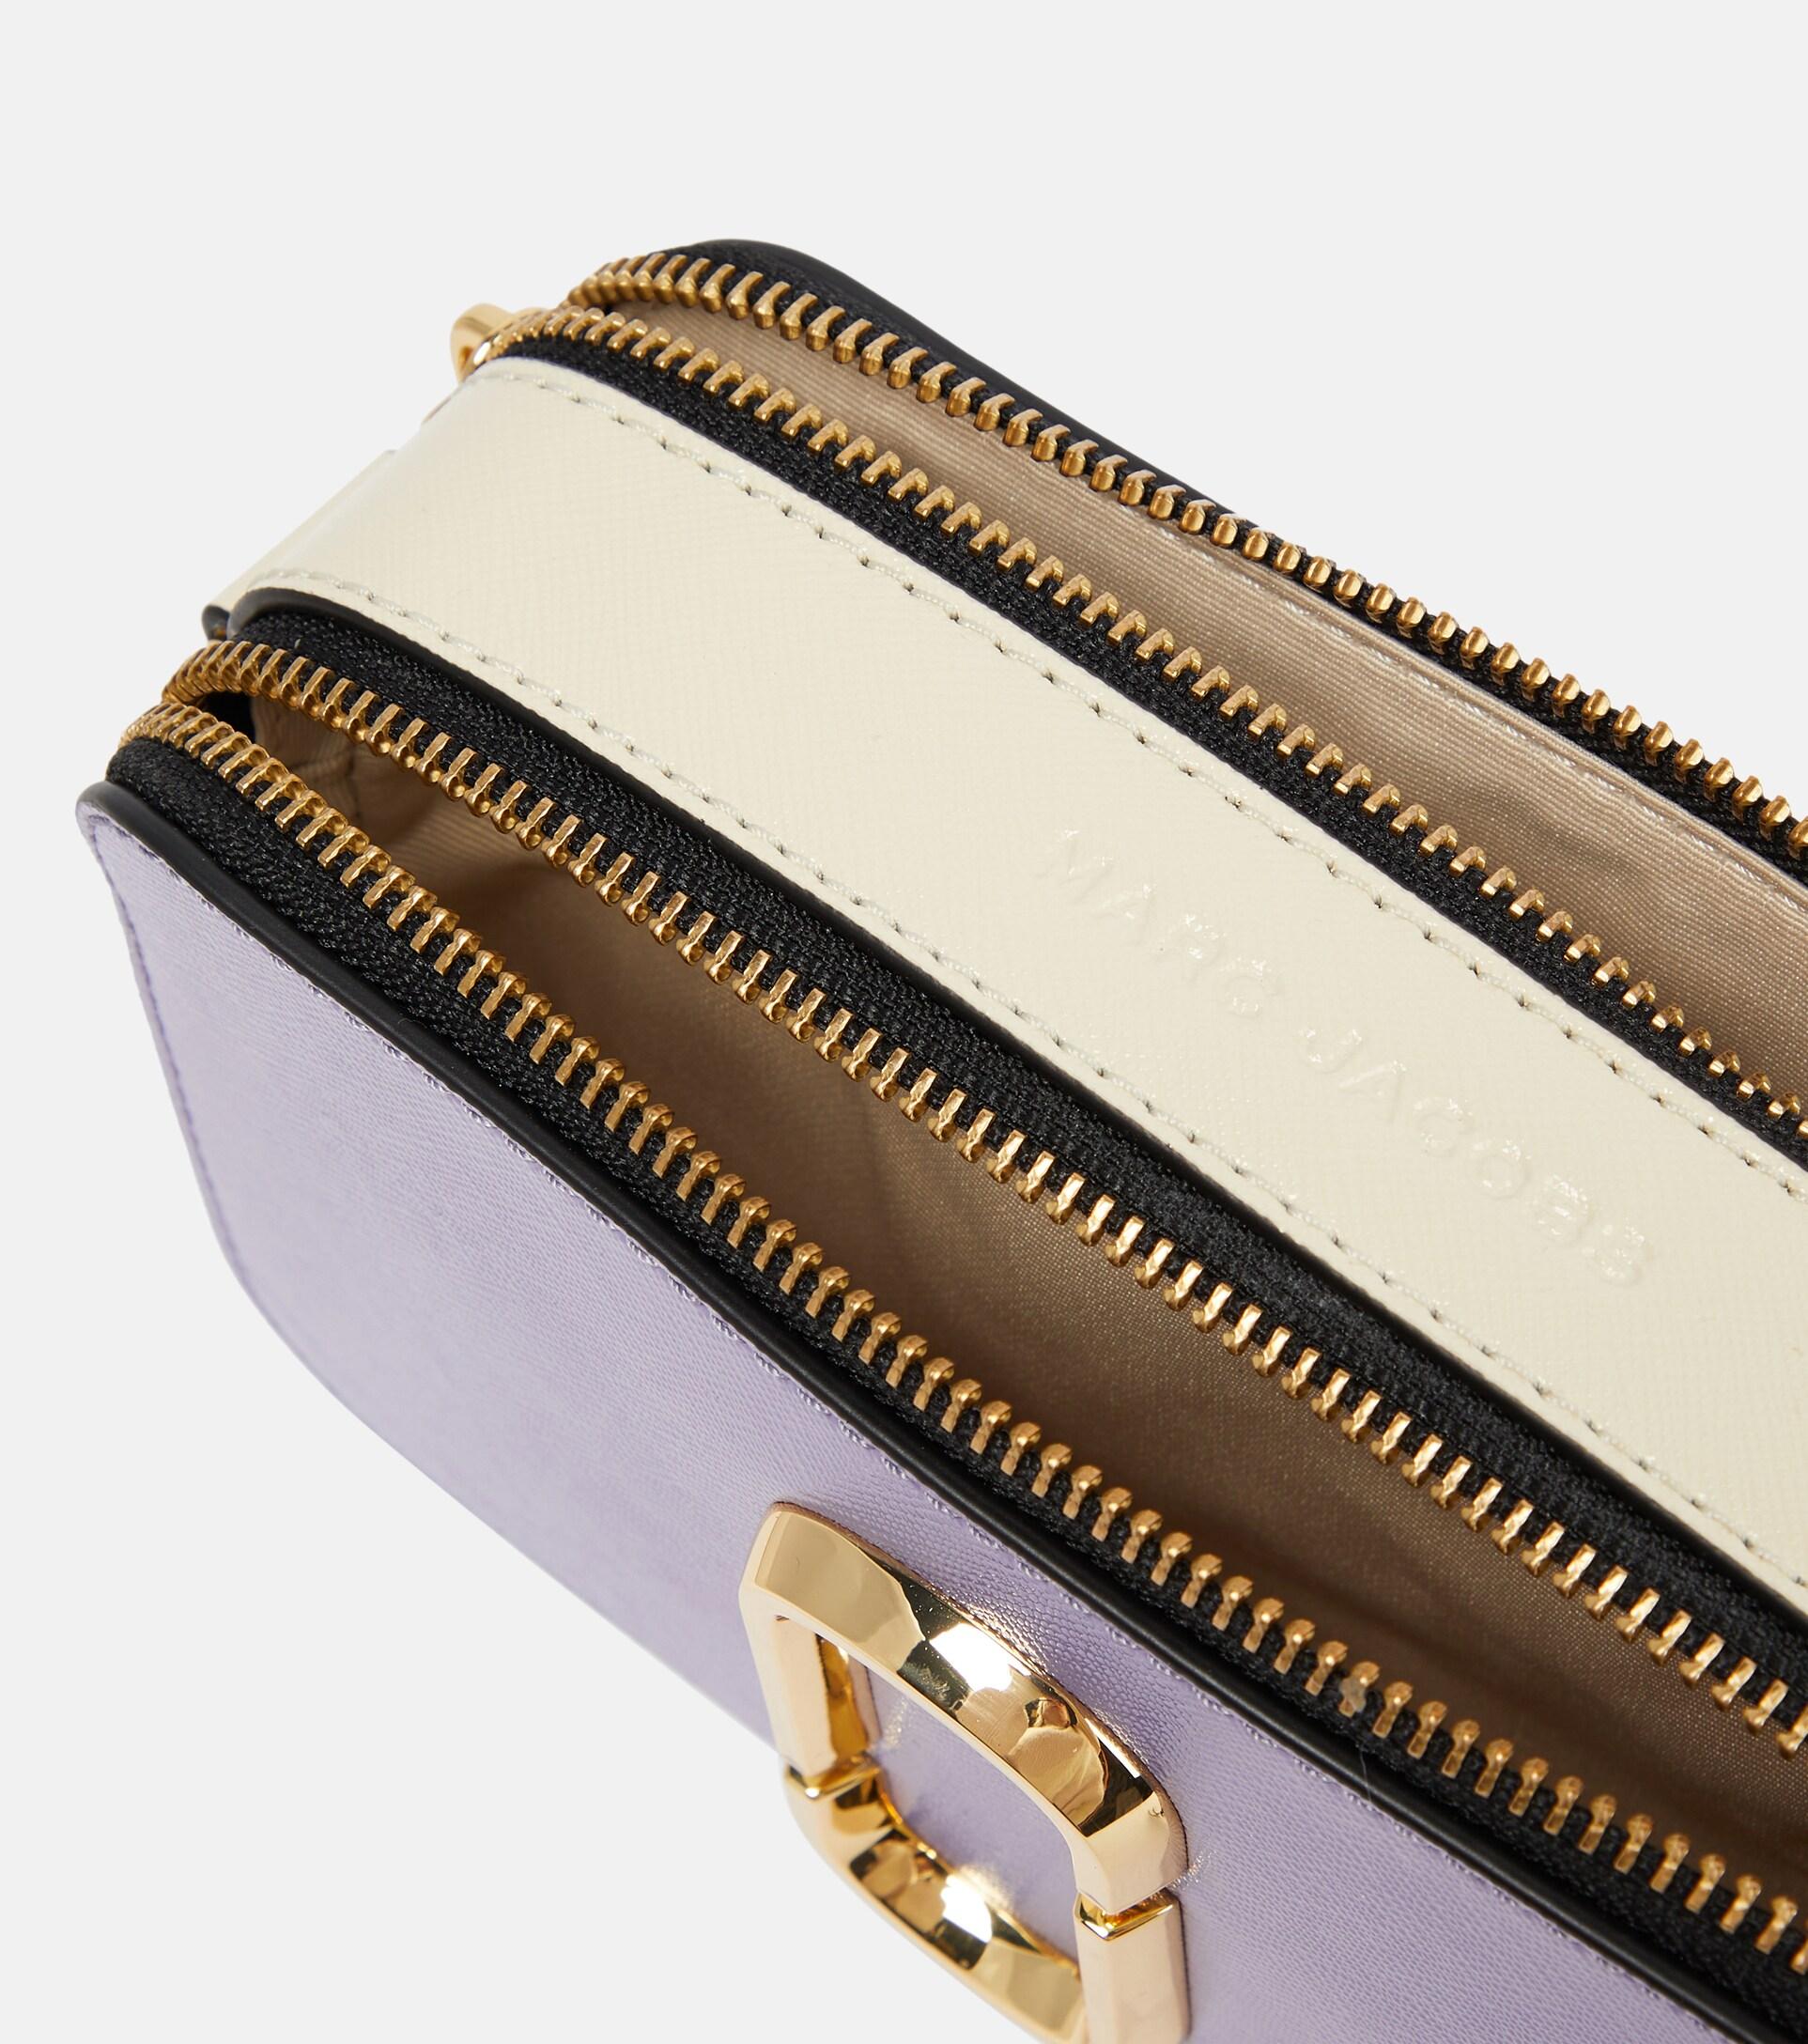 Snapshot crossbody bag Marc Jacobs Purple in Polyester - 28518310